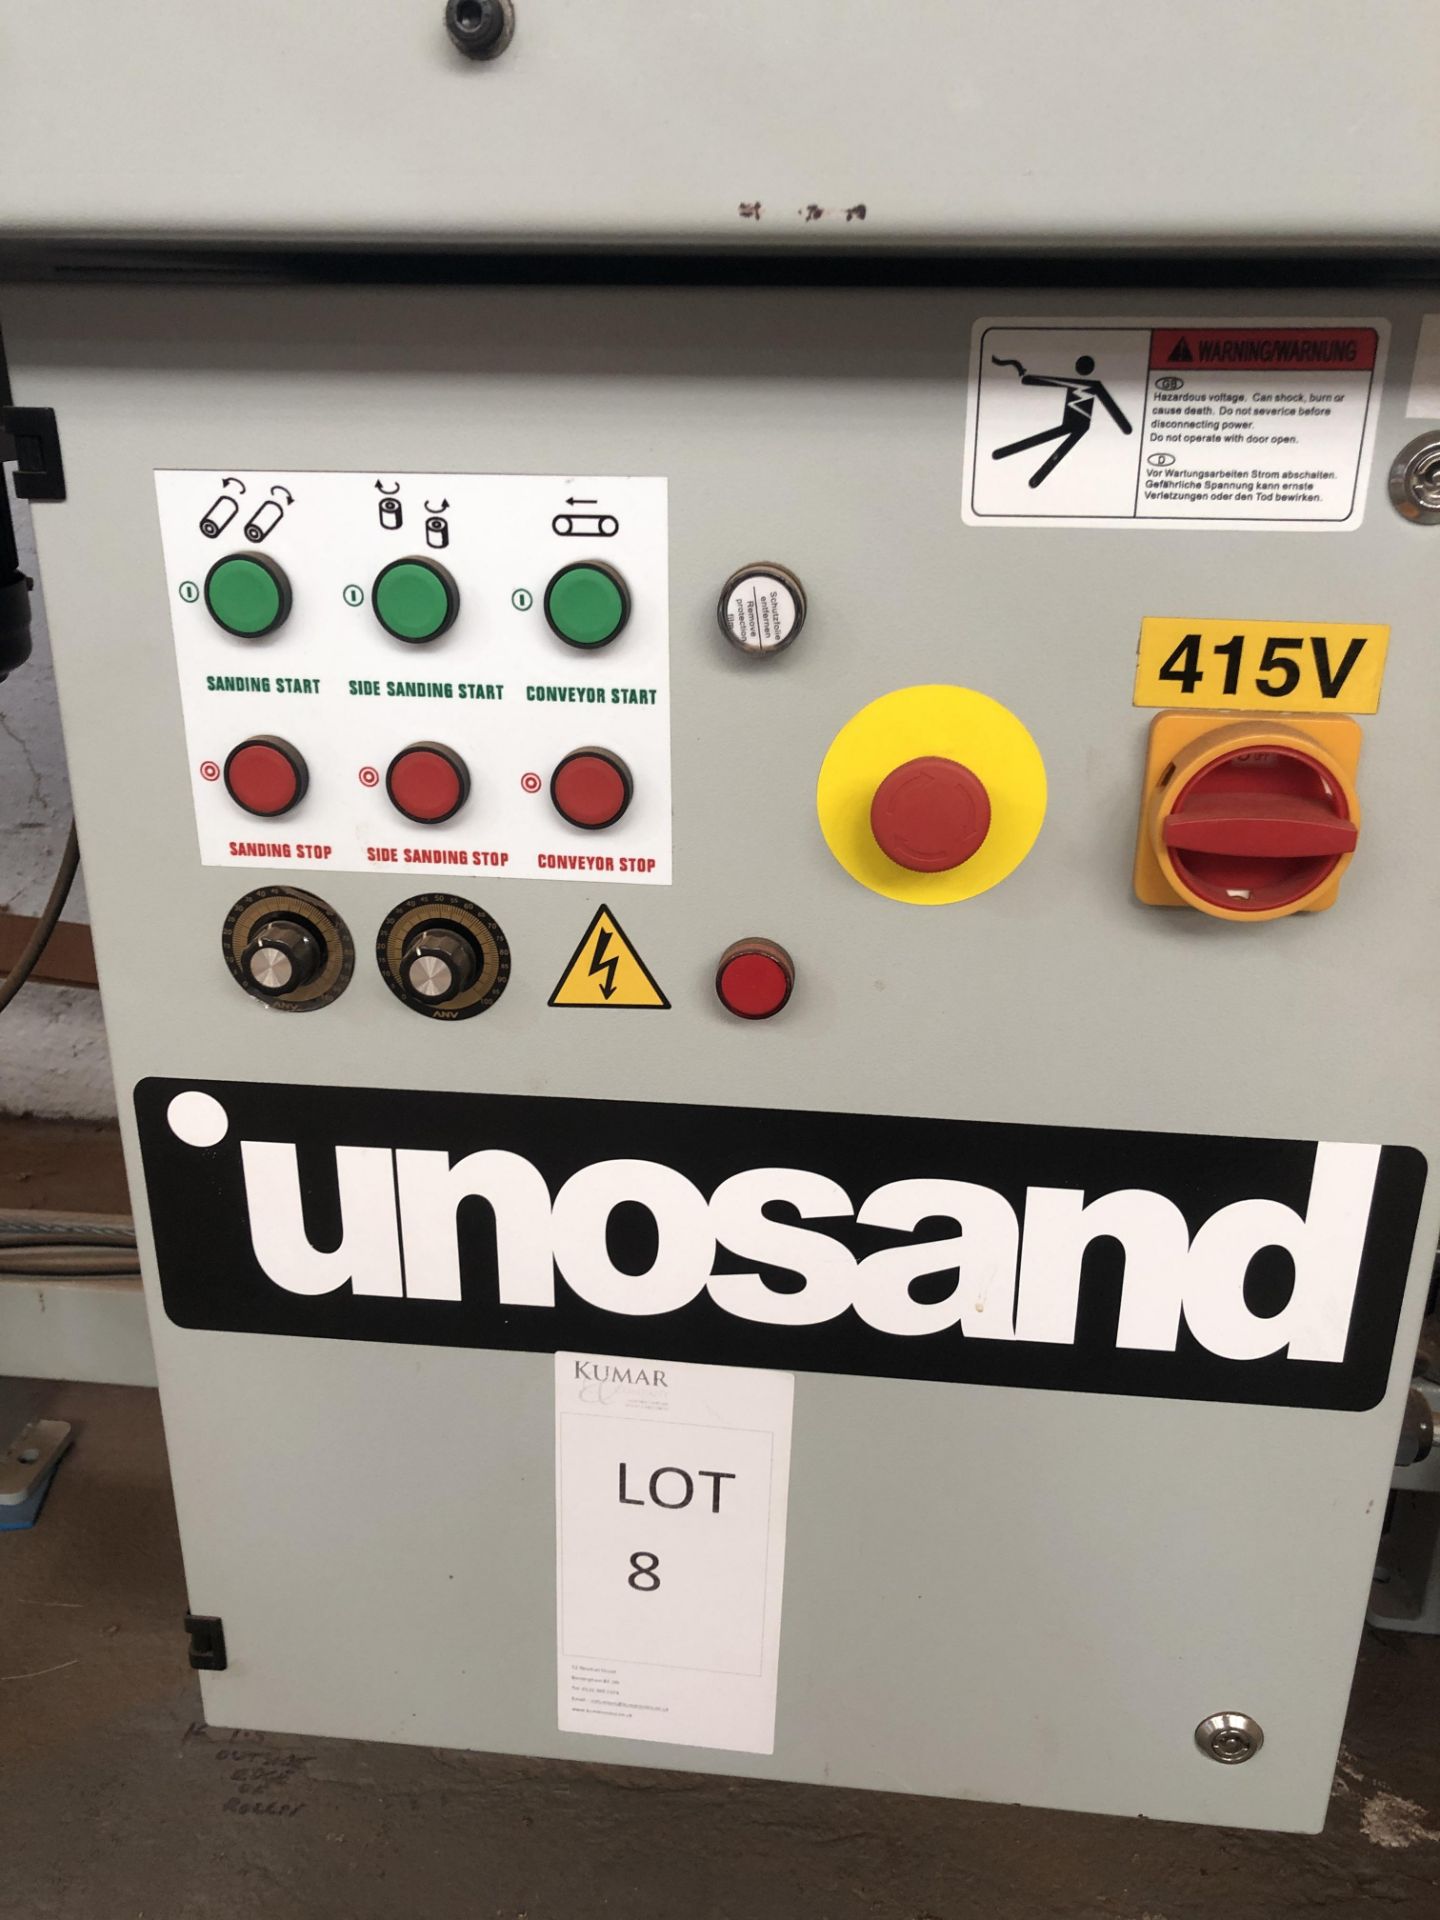 Unosand Model SL/300/55 Sanding Machine Serial No: H3074 (11/2016) 3phase(Please note: Item needs - Image 3 of 16